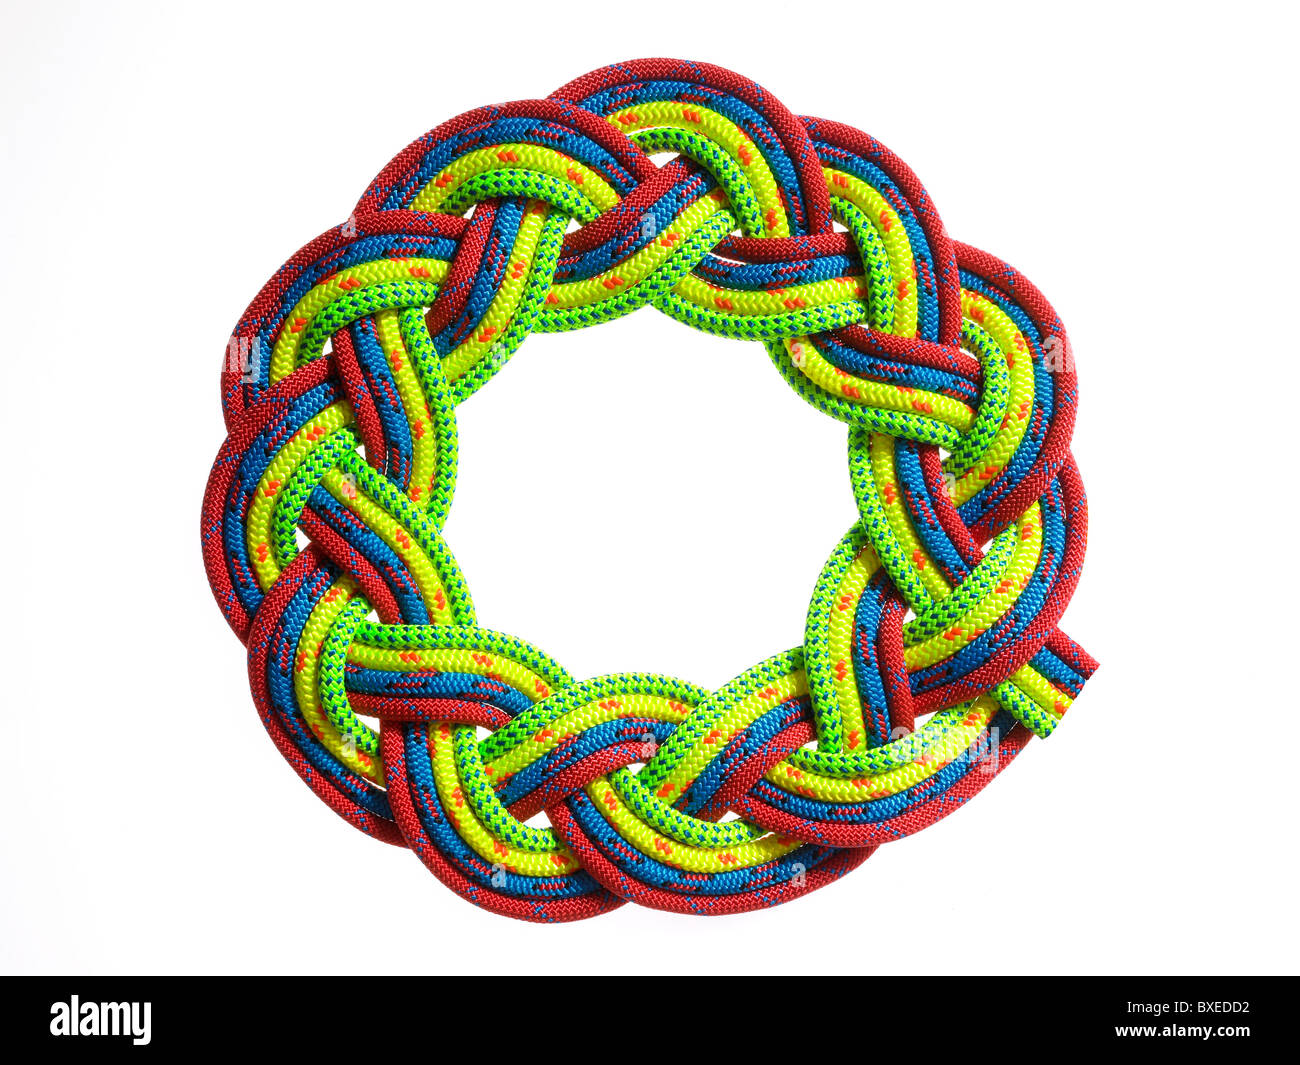 Colorful rope braided in a circle Stock Photo